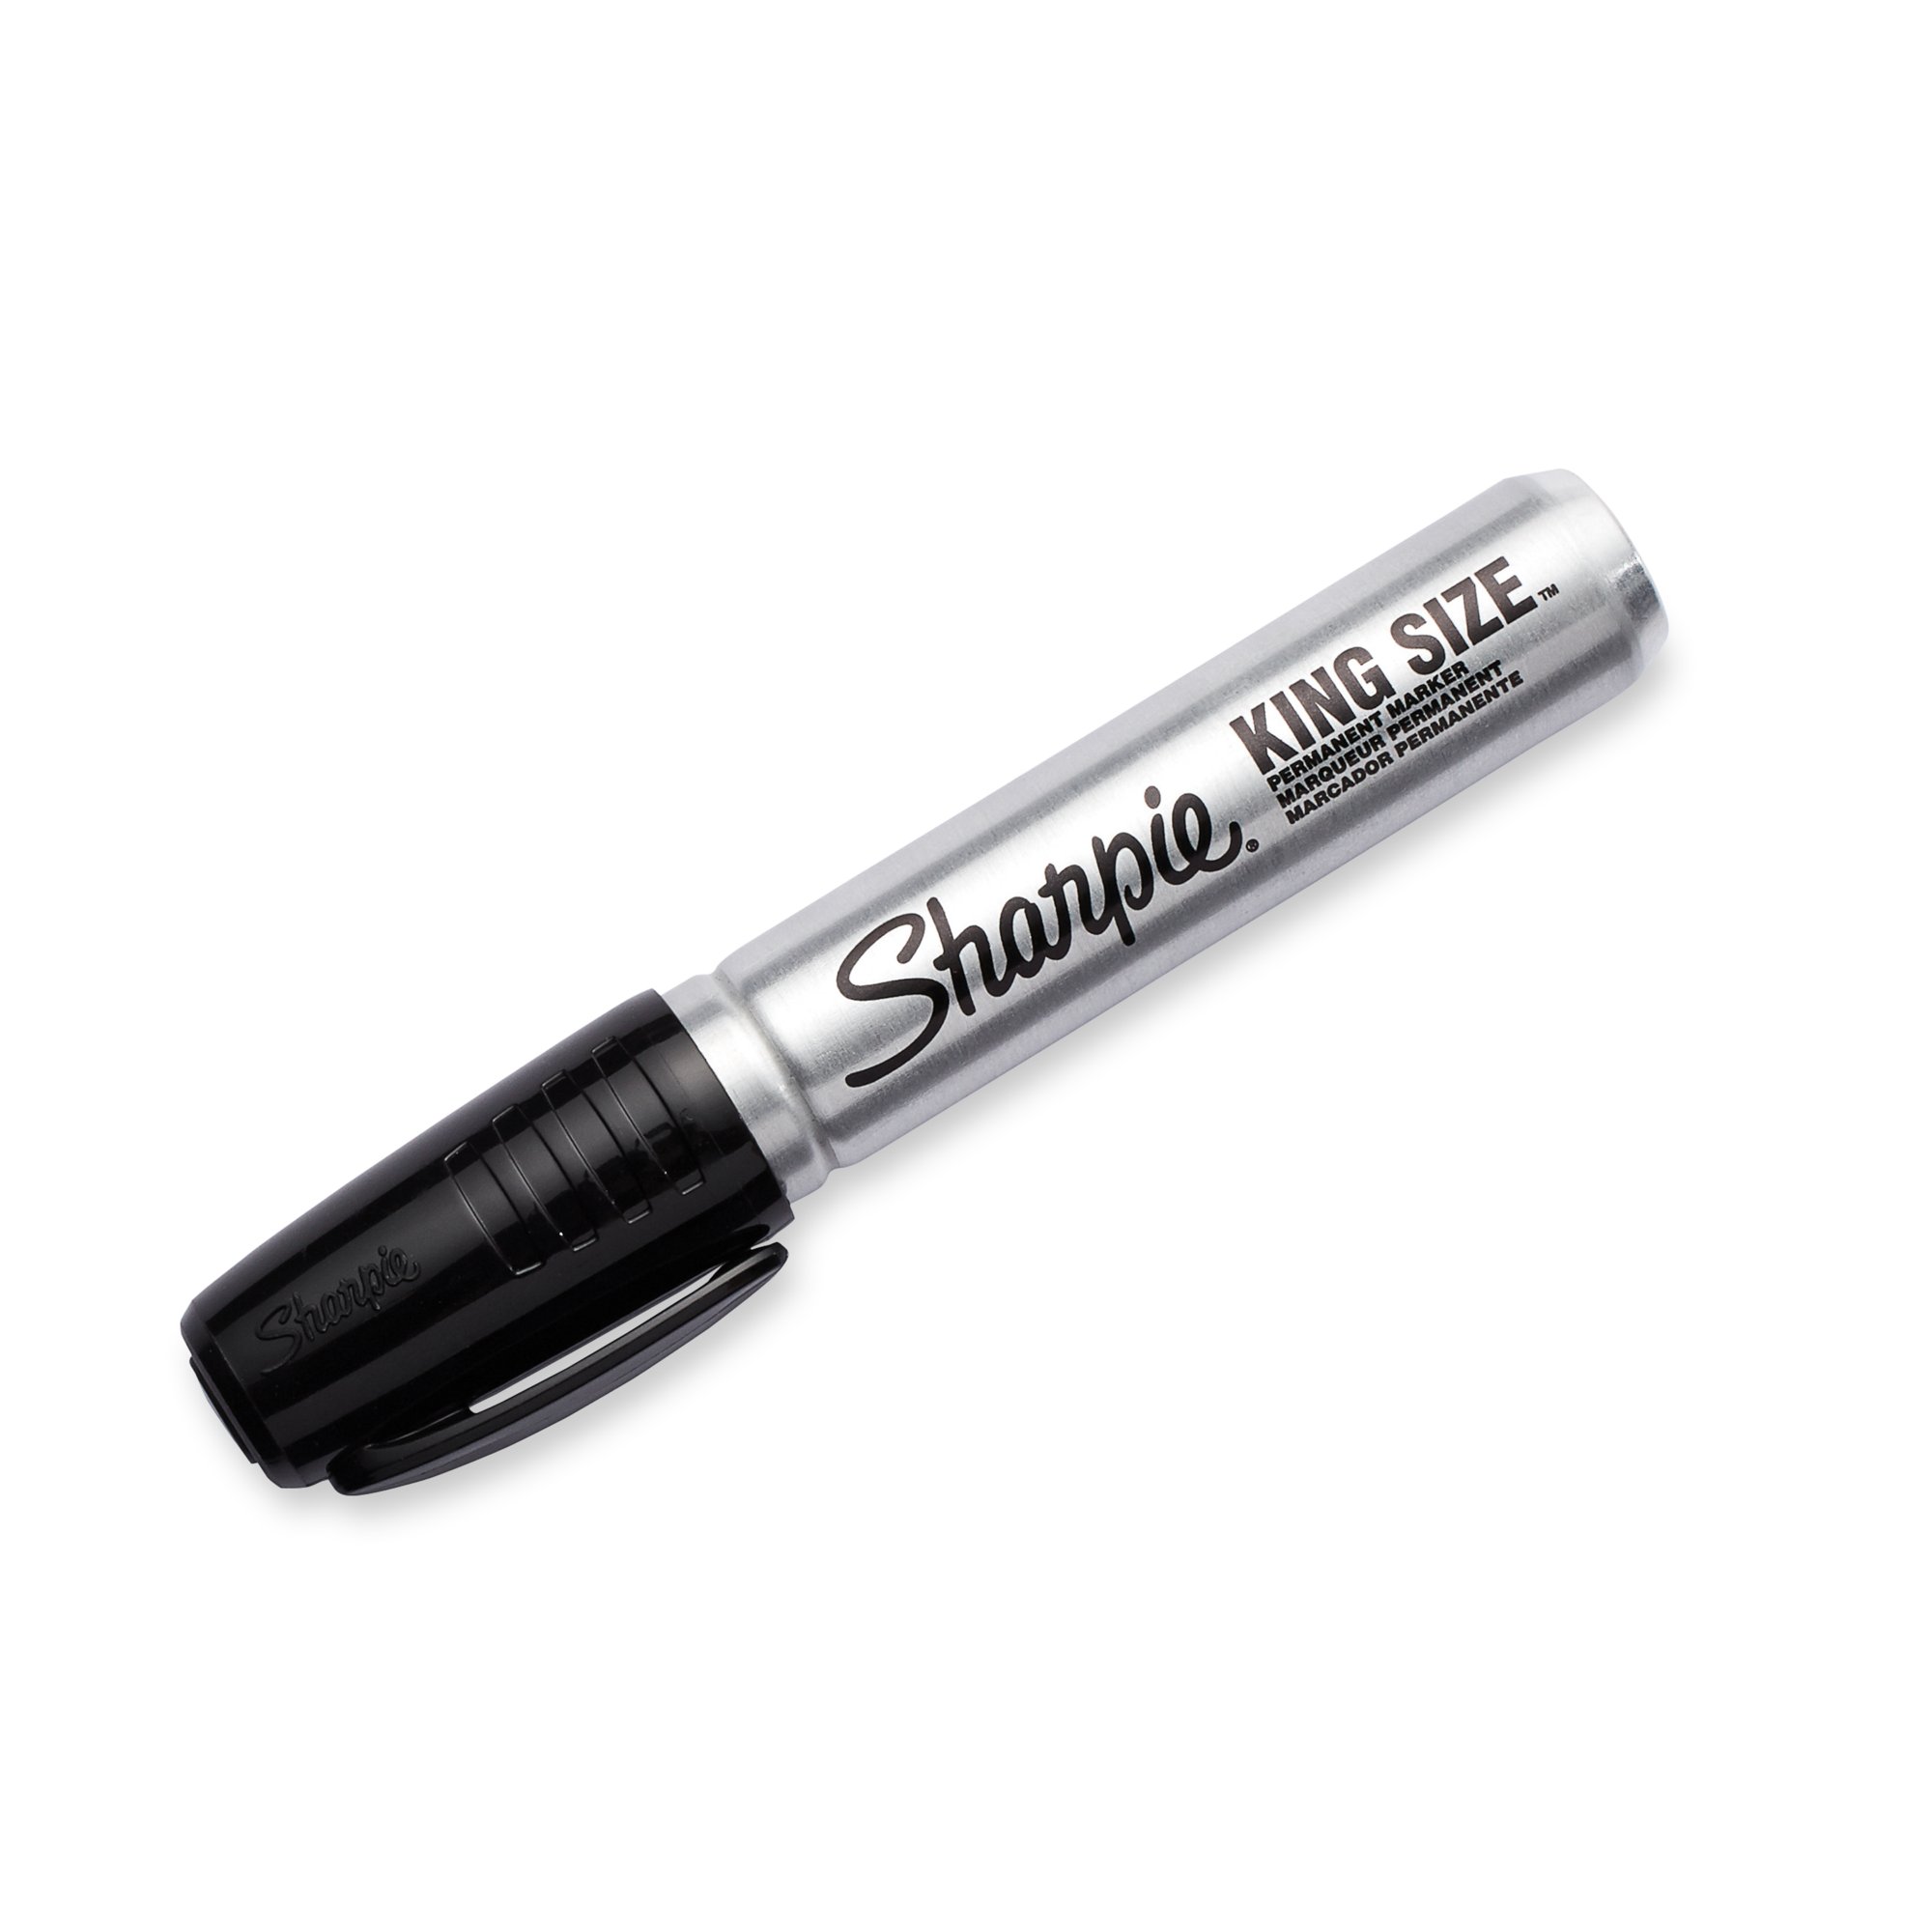 Sharpie vs Generic Permanent marker. Which one is best? 